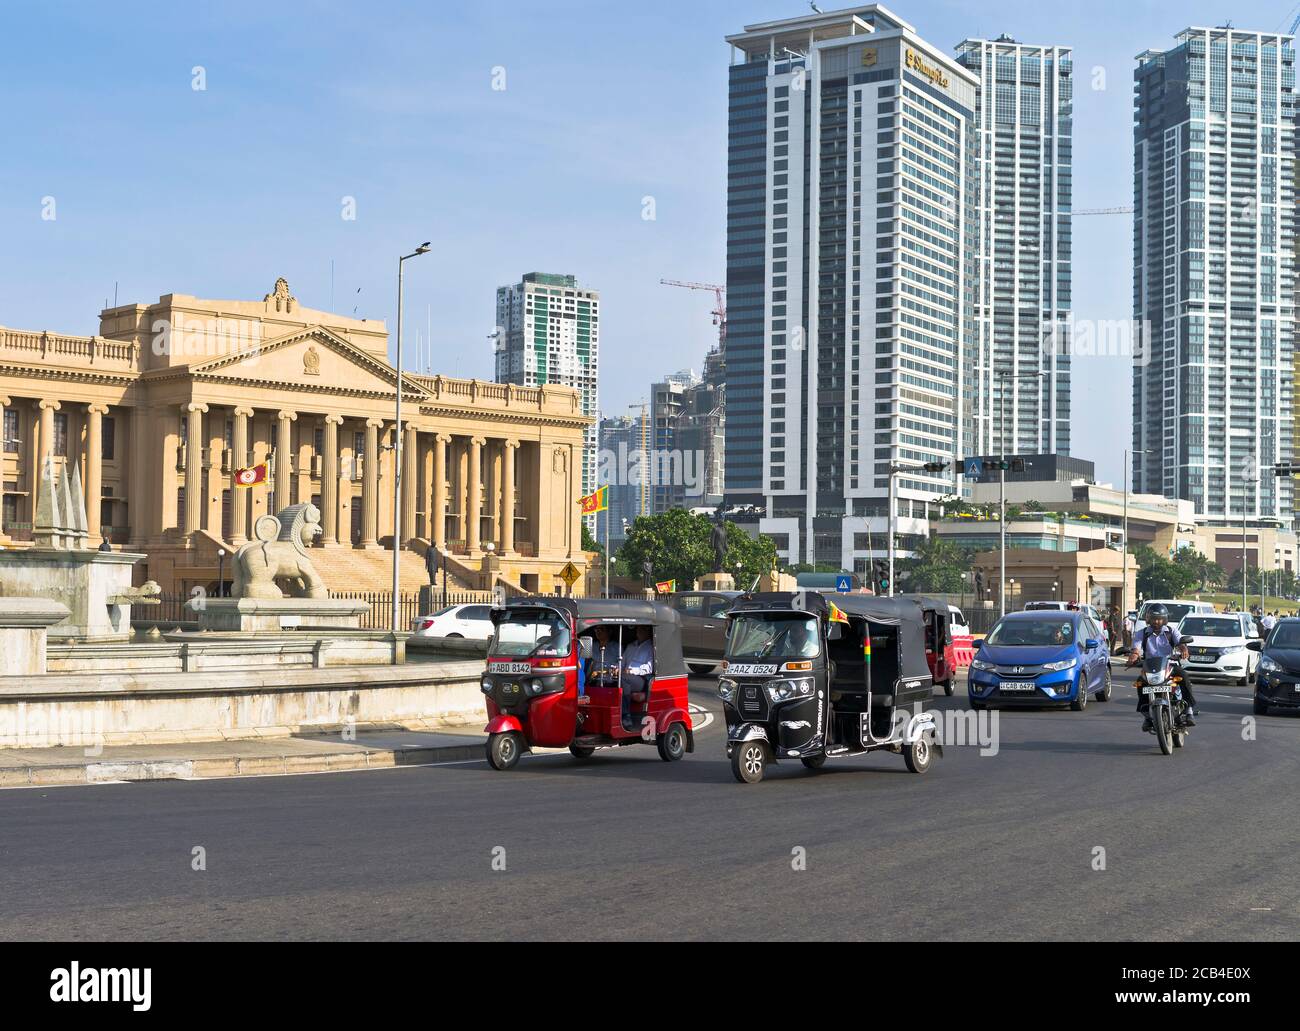 dh Galle Face roundabout COLOMBO CITY SRI LANKA Cars Tuk Tuk taxis traffic Old Parliament Building Stock Photo